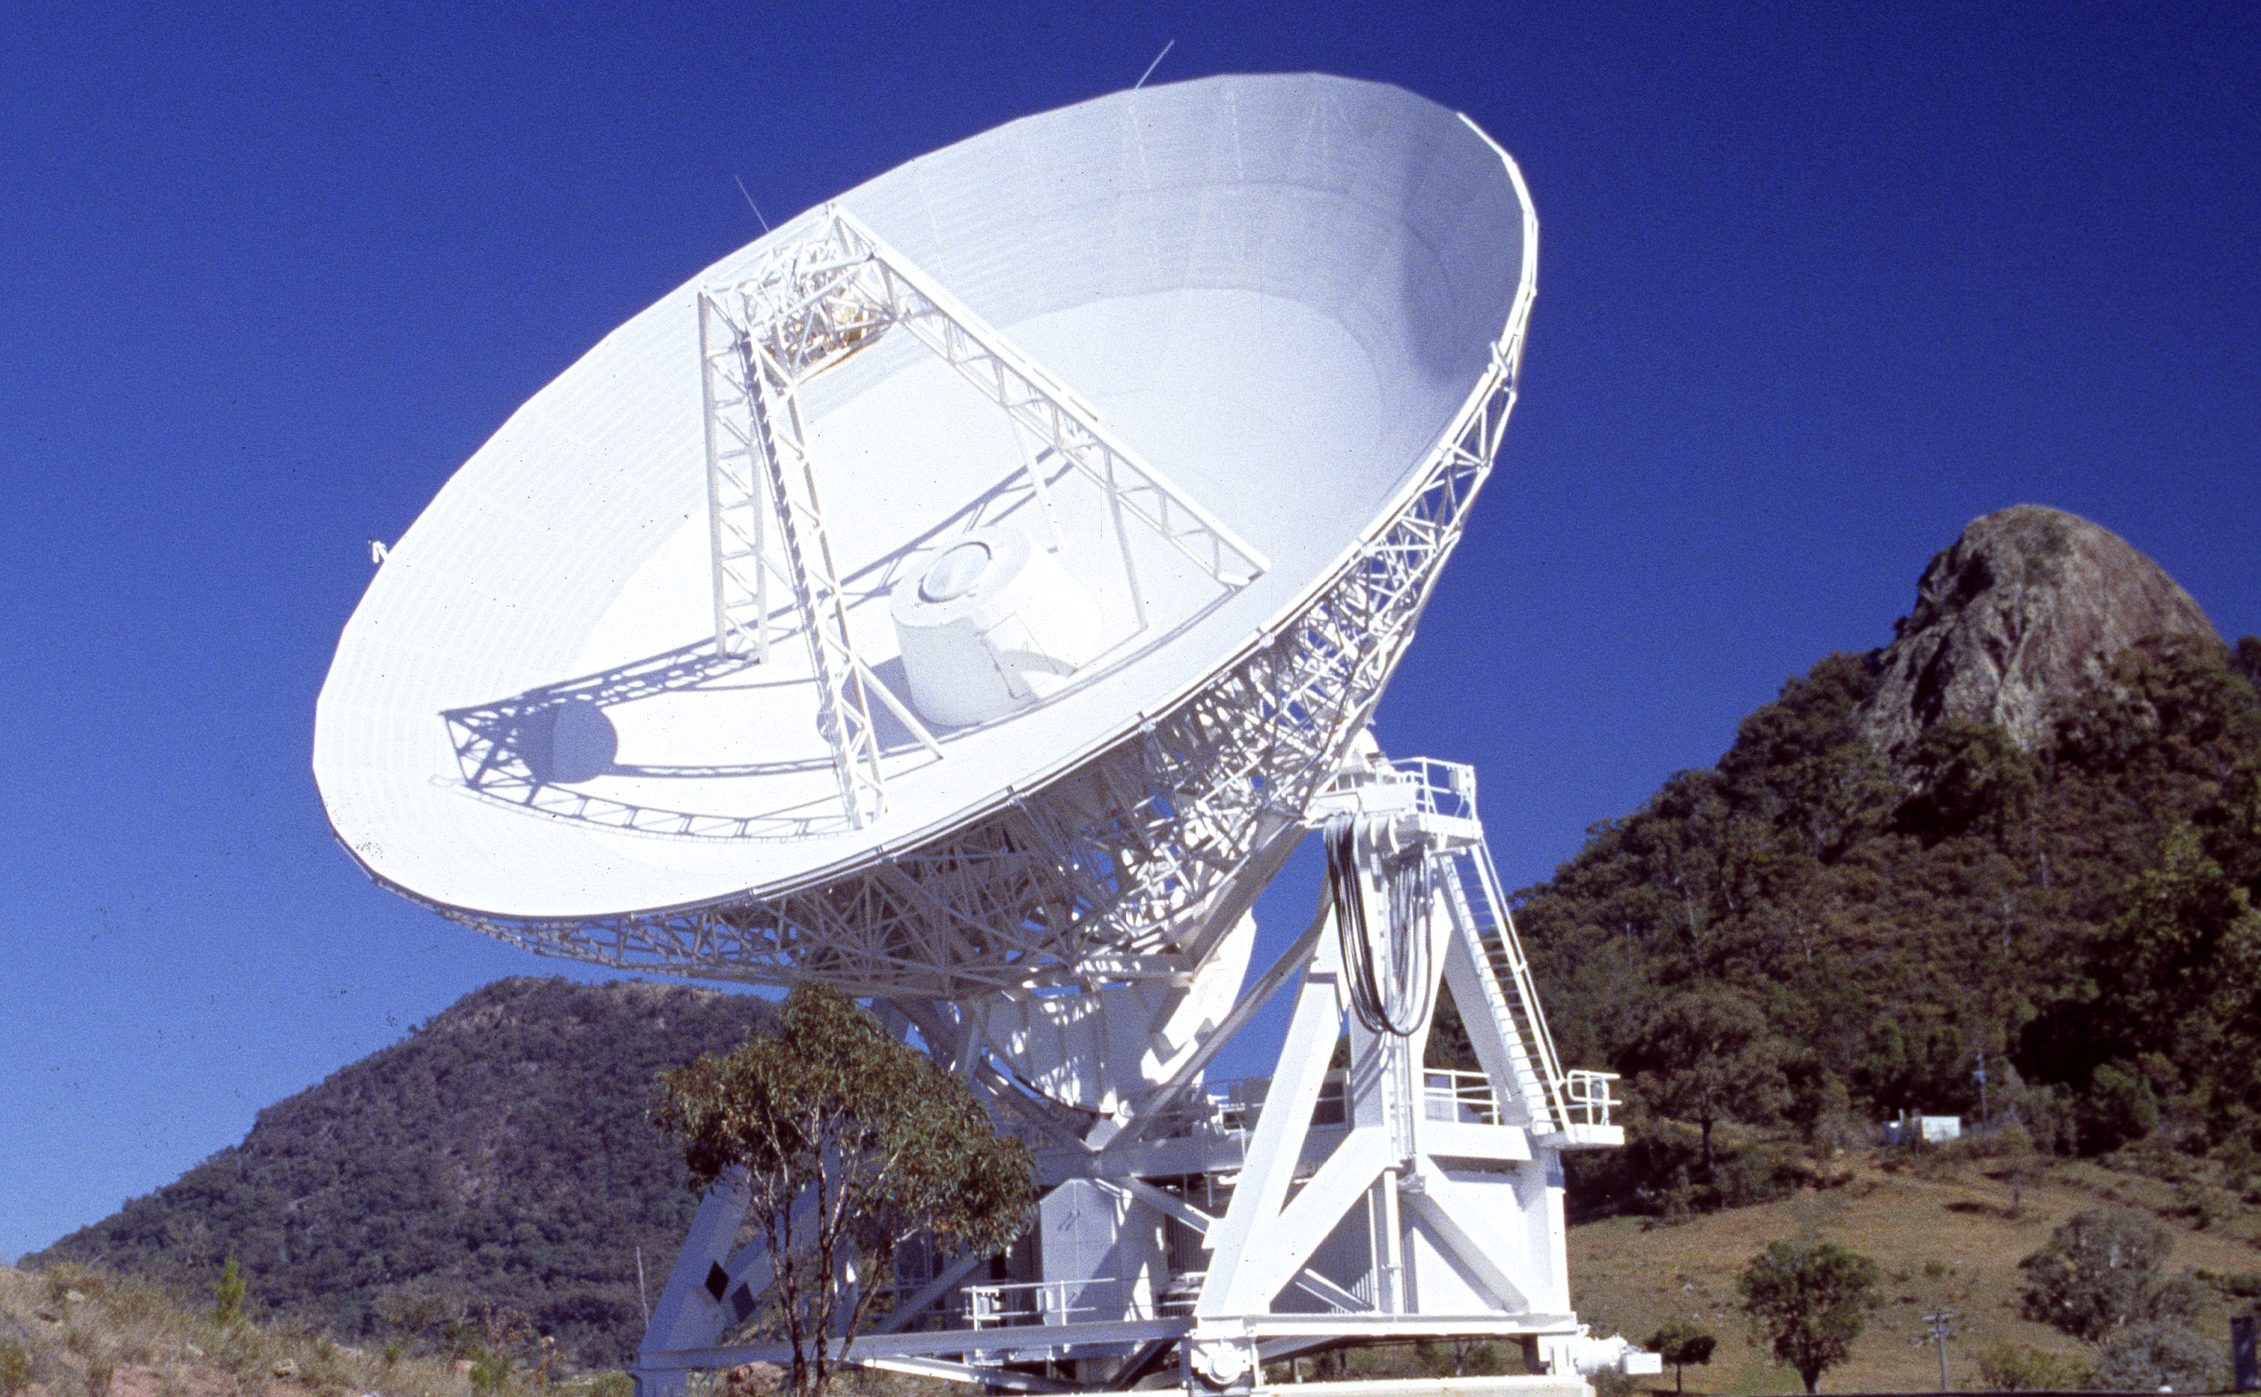 Image shows the Mopra radio telescope. It is a white radio astronomy telescope with a large rocky outcrop and blue sky in the background.